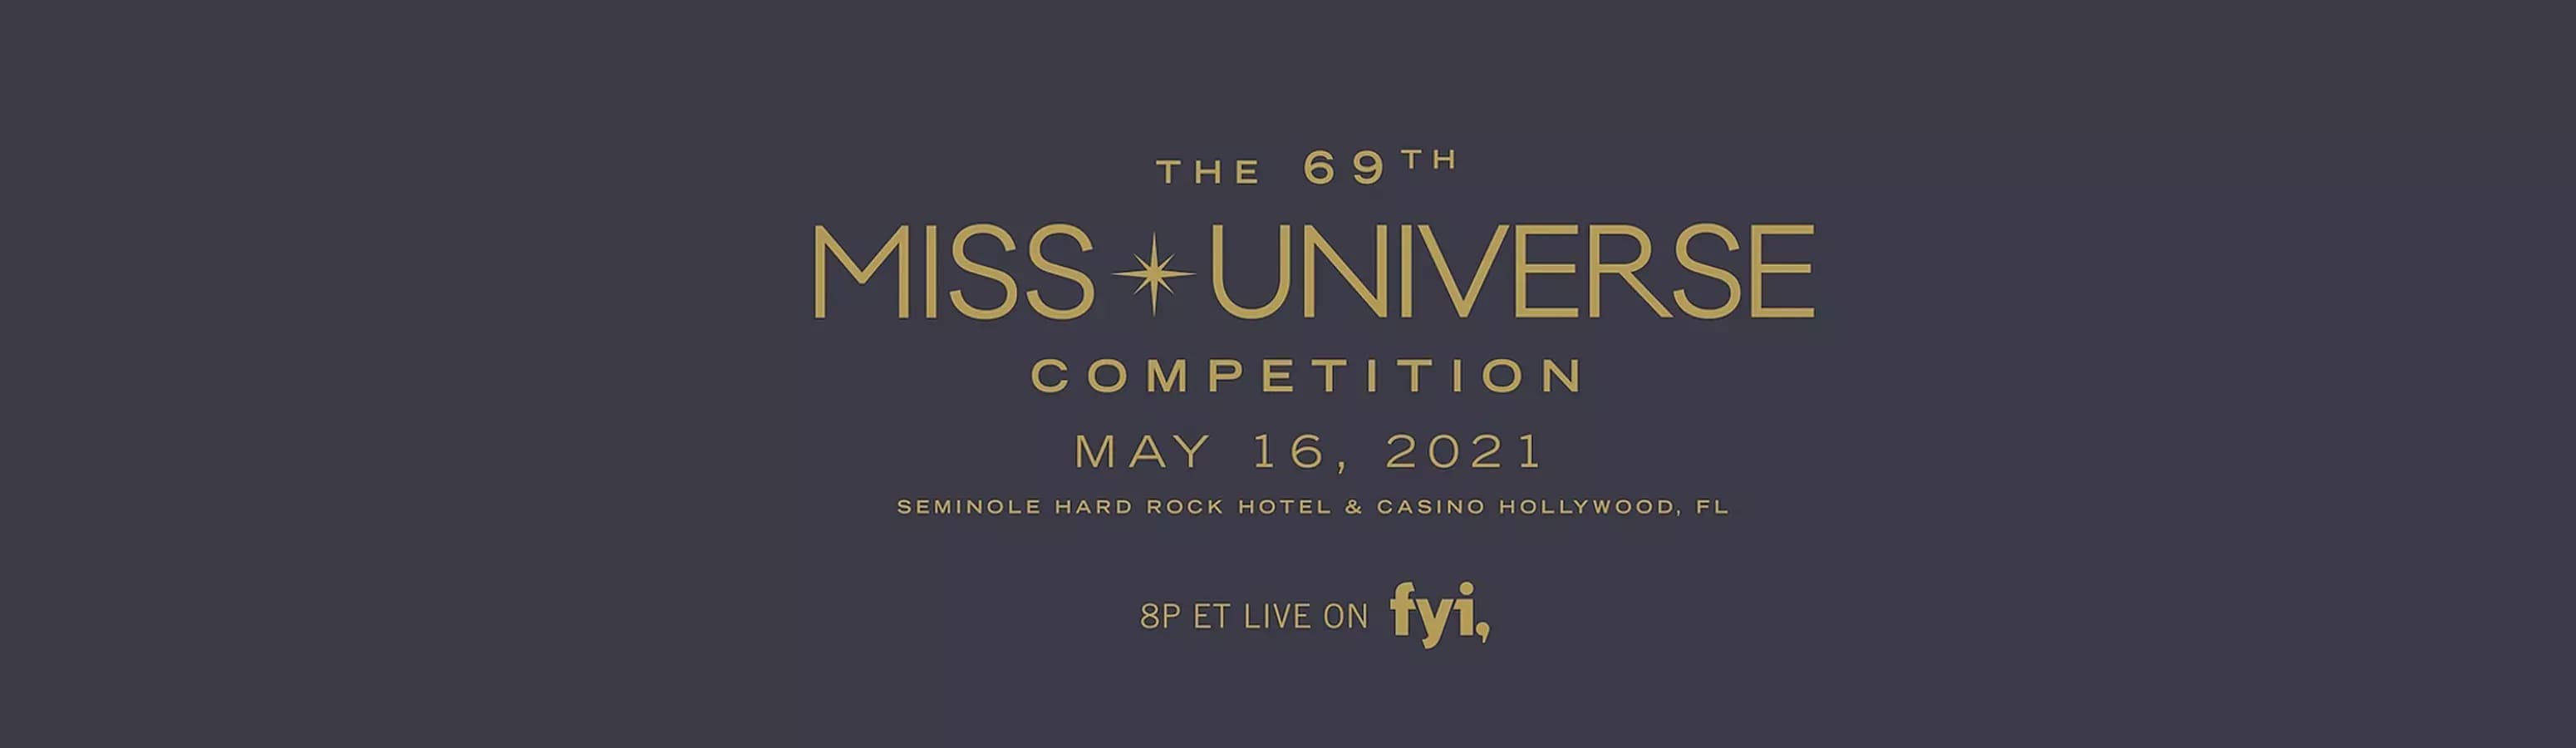 The grand finale of the Miss Universe in the USA